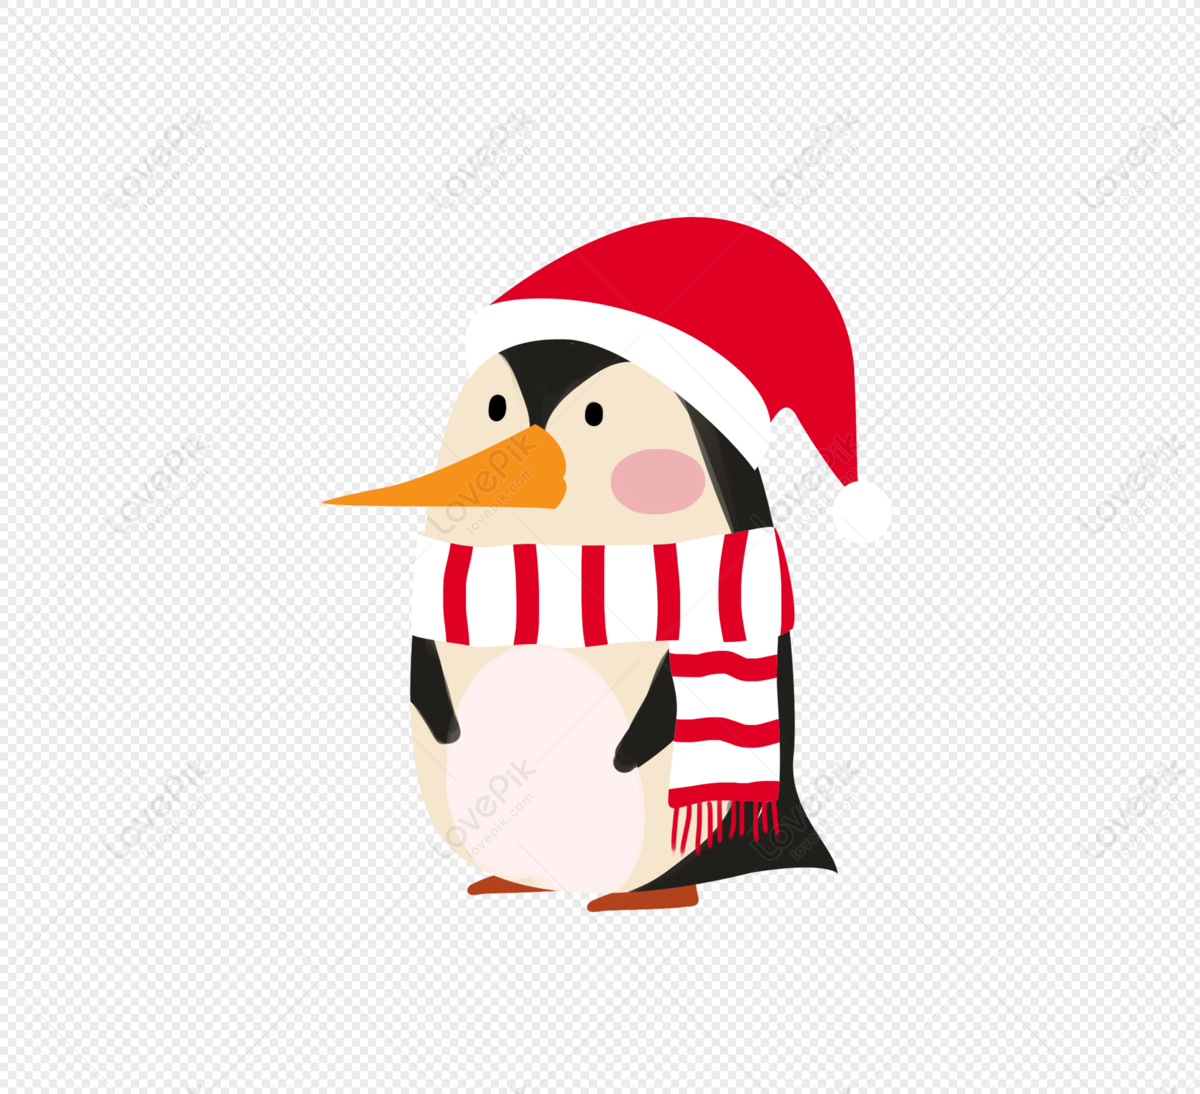 Lovely Christmas Penguin Image PNG Transparent Background And Clipart Image  For Free Download - Lovepik | 400799780